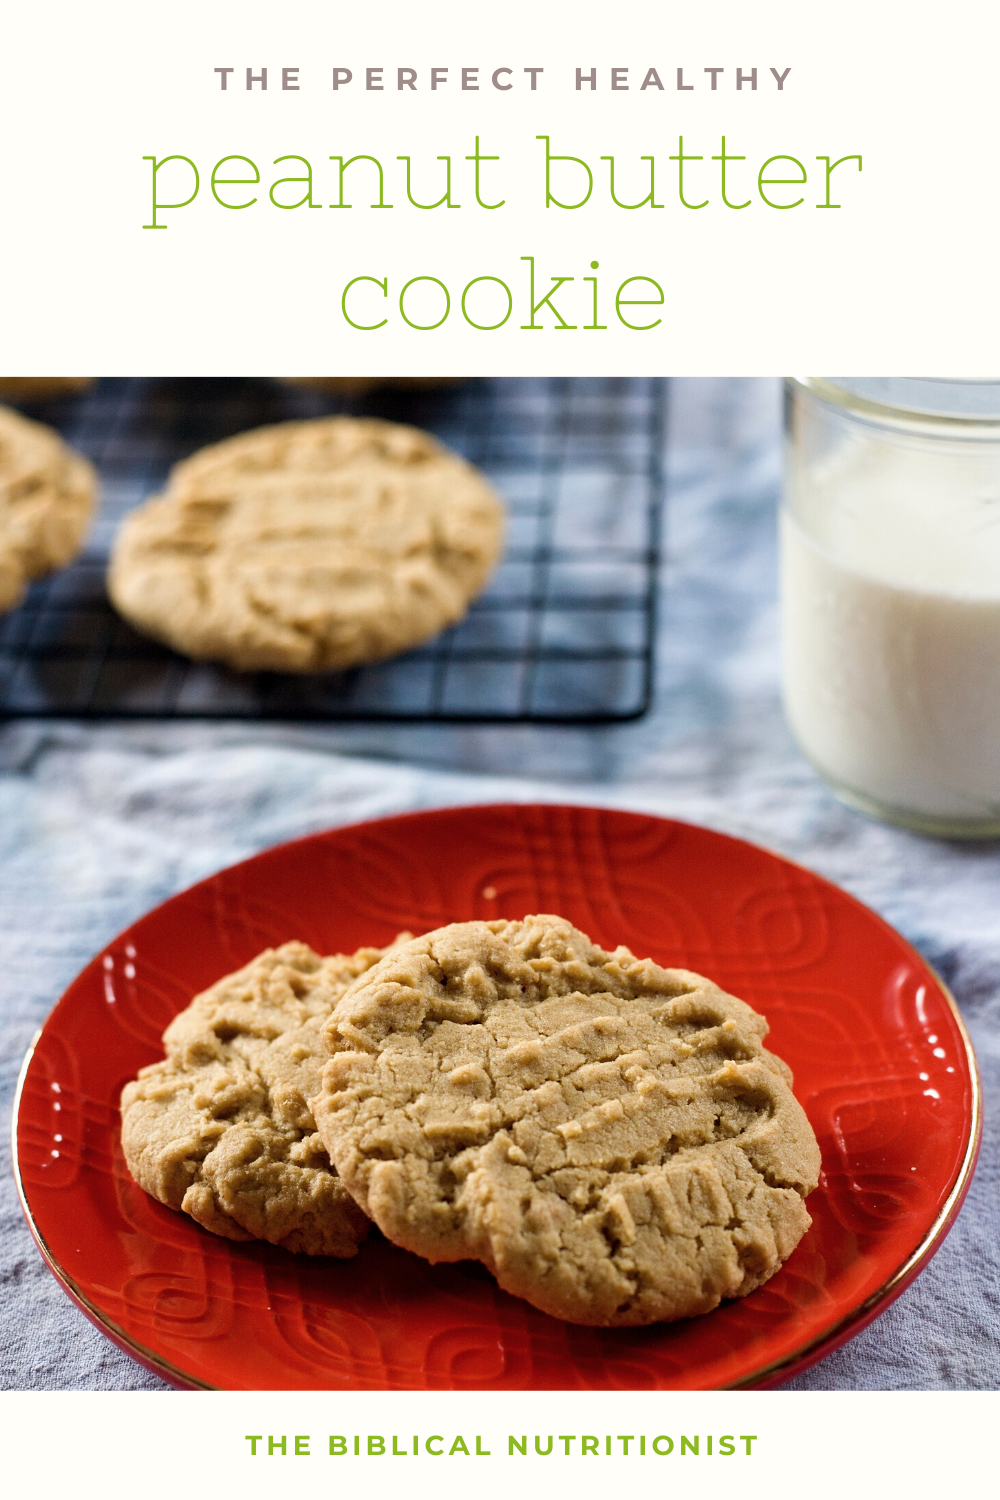 The Perfect Healthy Peanut Butter Cookie